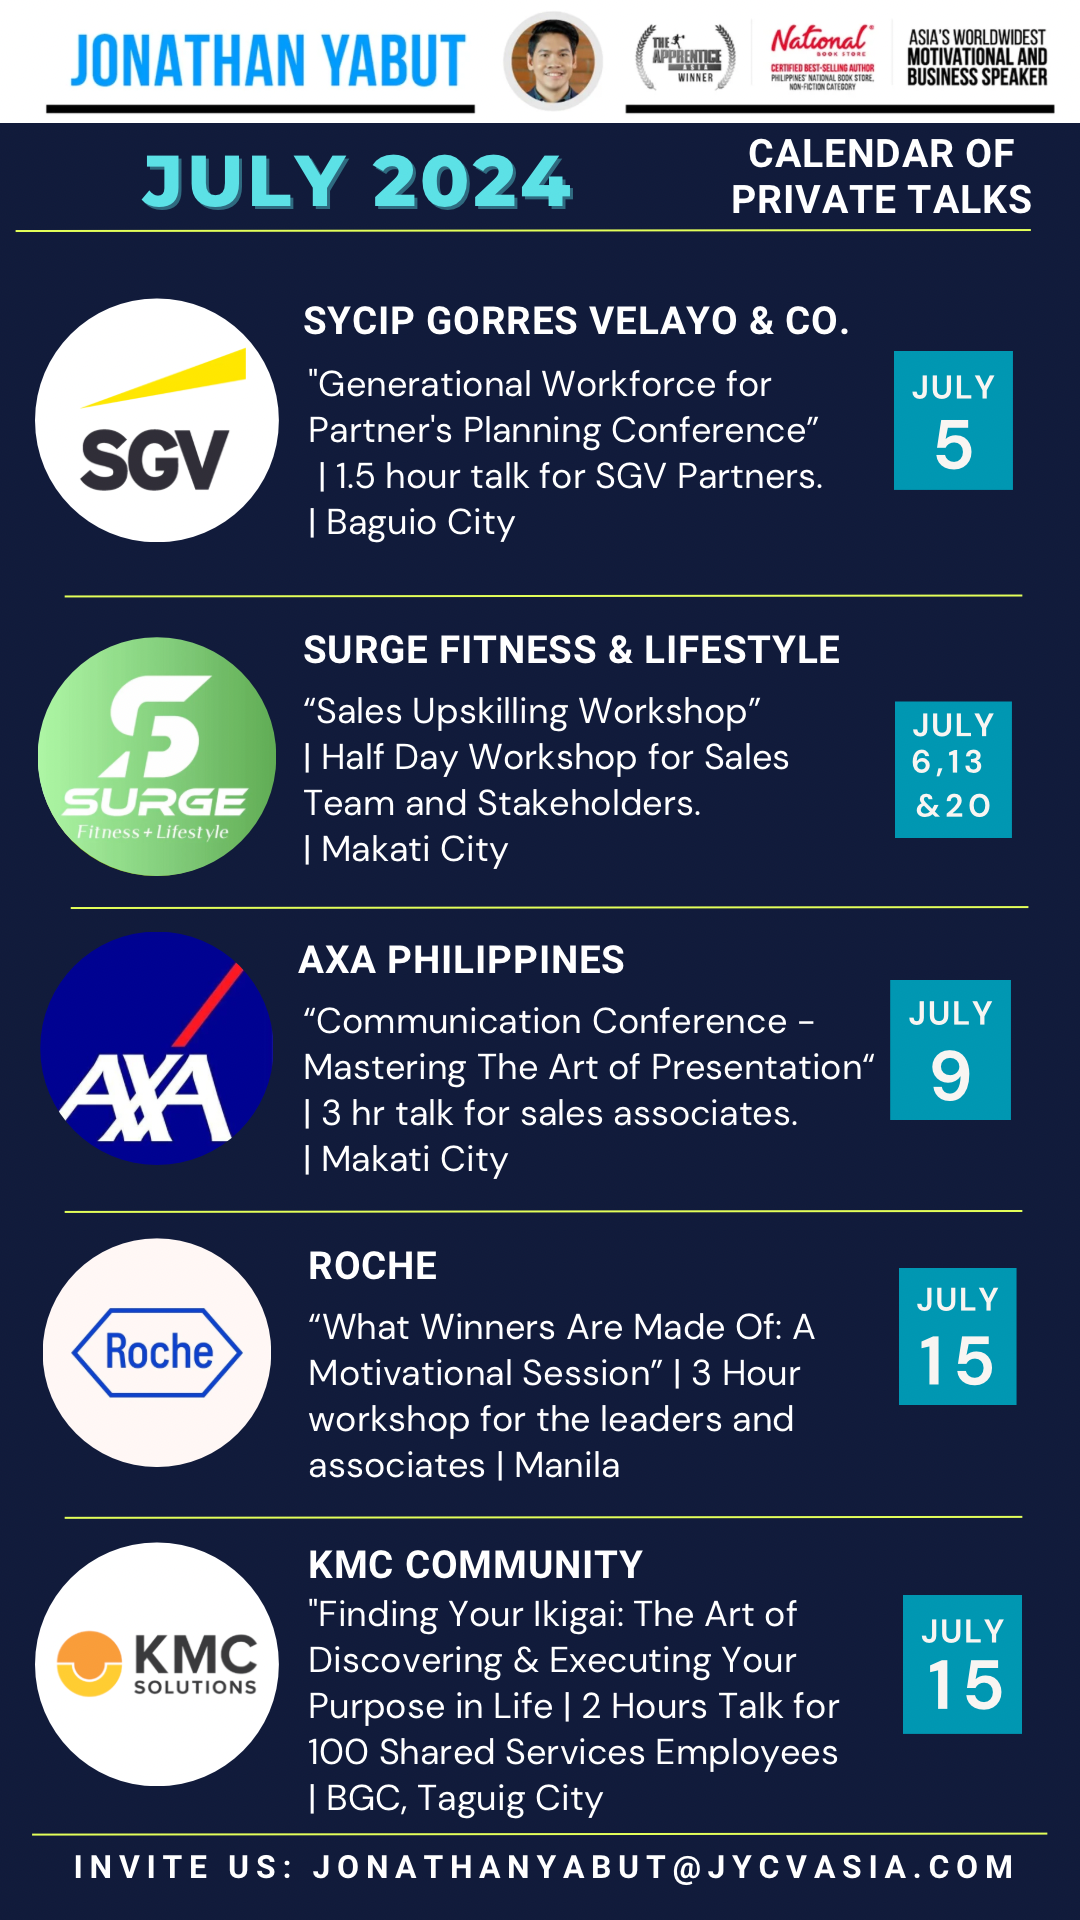 Jonathan Yabut leadership public speaking motivational speaker Asia Philippines career job search jobhunting quitting bosses leaders success corporate The Apprentice Asia Gen Z Gen Y Millennials 2 (1)